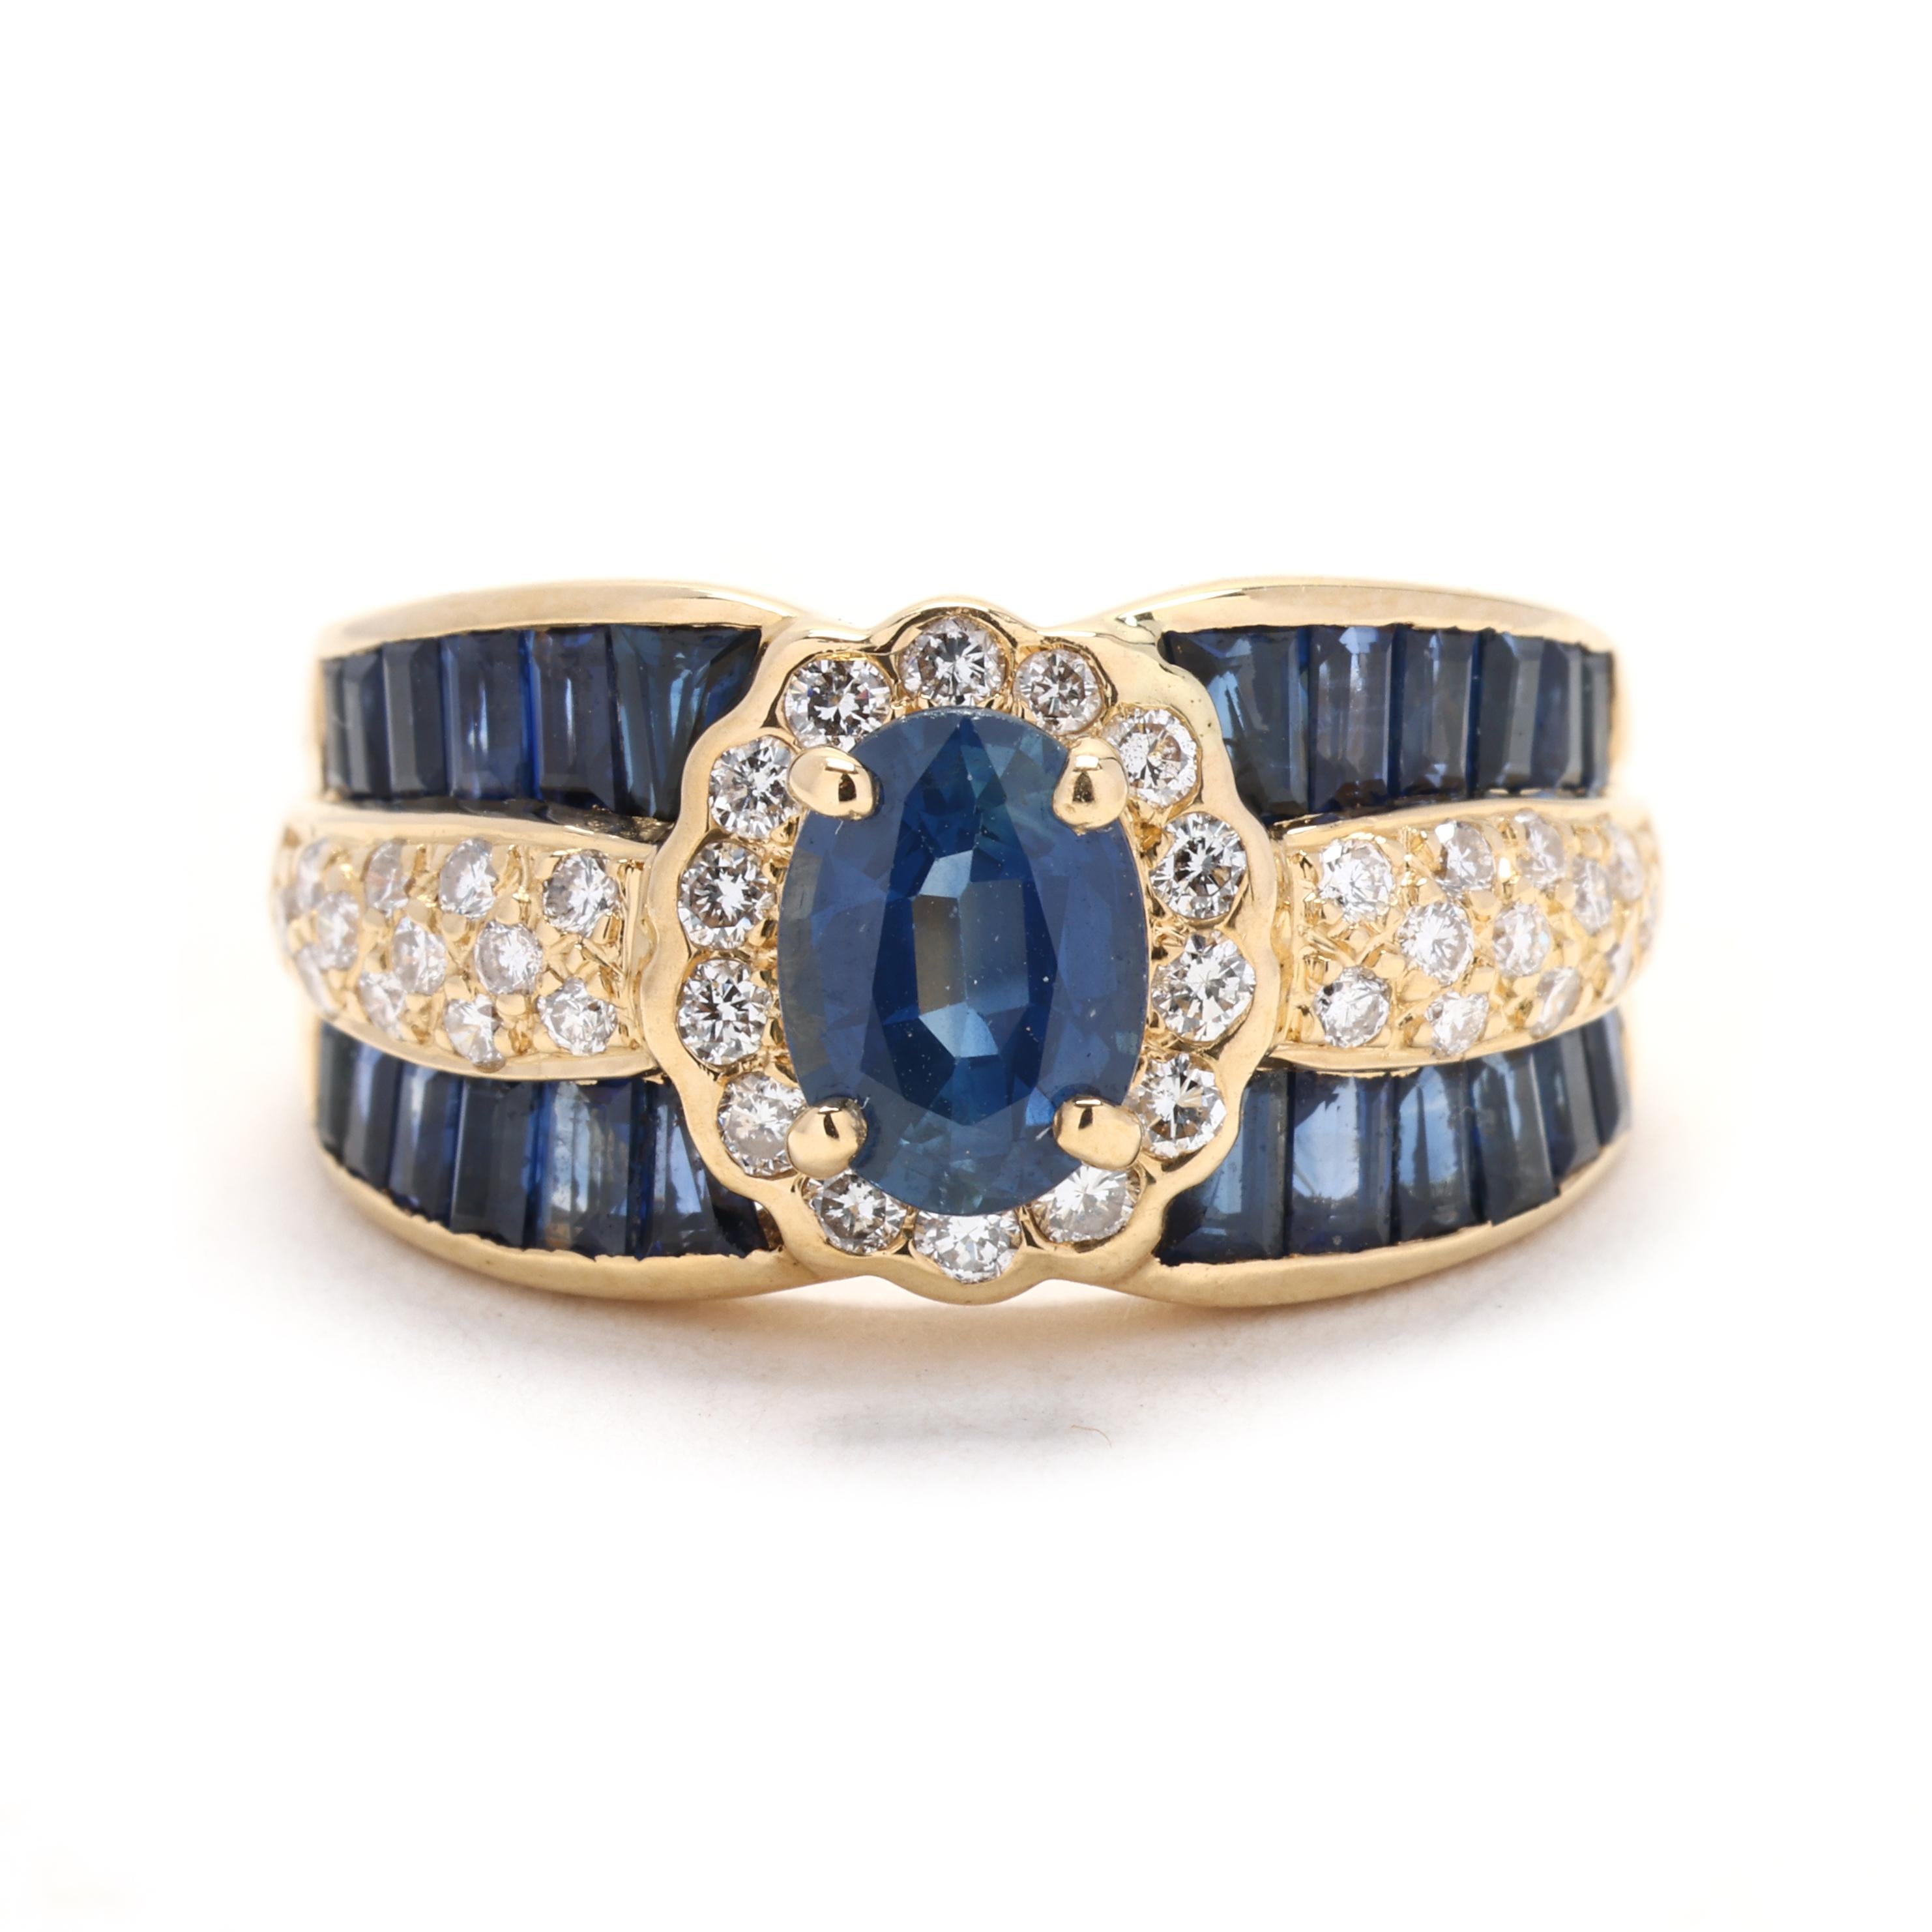 Multi Stone Sapphire and Diamond Cocktail Ring, 14K Yellow Gold, Ring Size 6